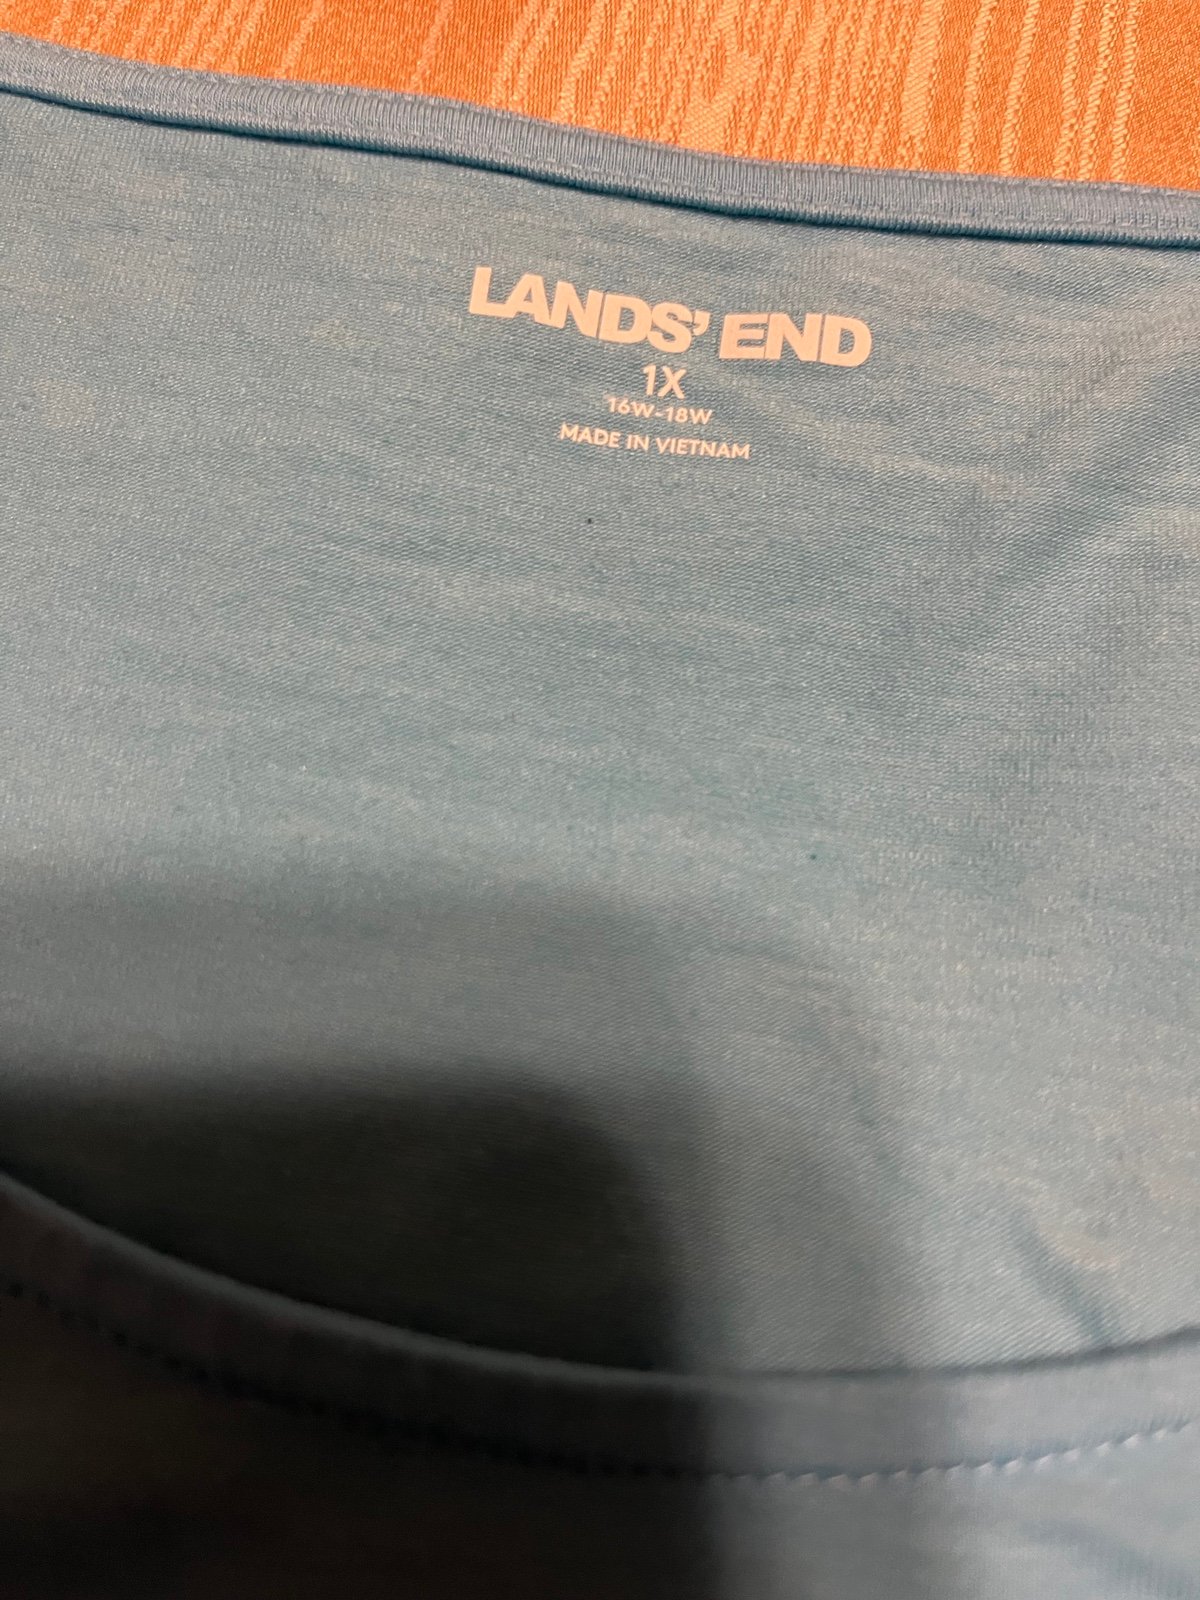 Beautiful Lands End Womens Casual Tee Shirt Pullover Top cotton Plus Size 1X gYi3y47pK Cool